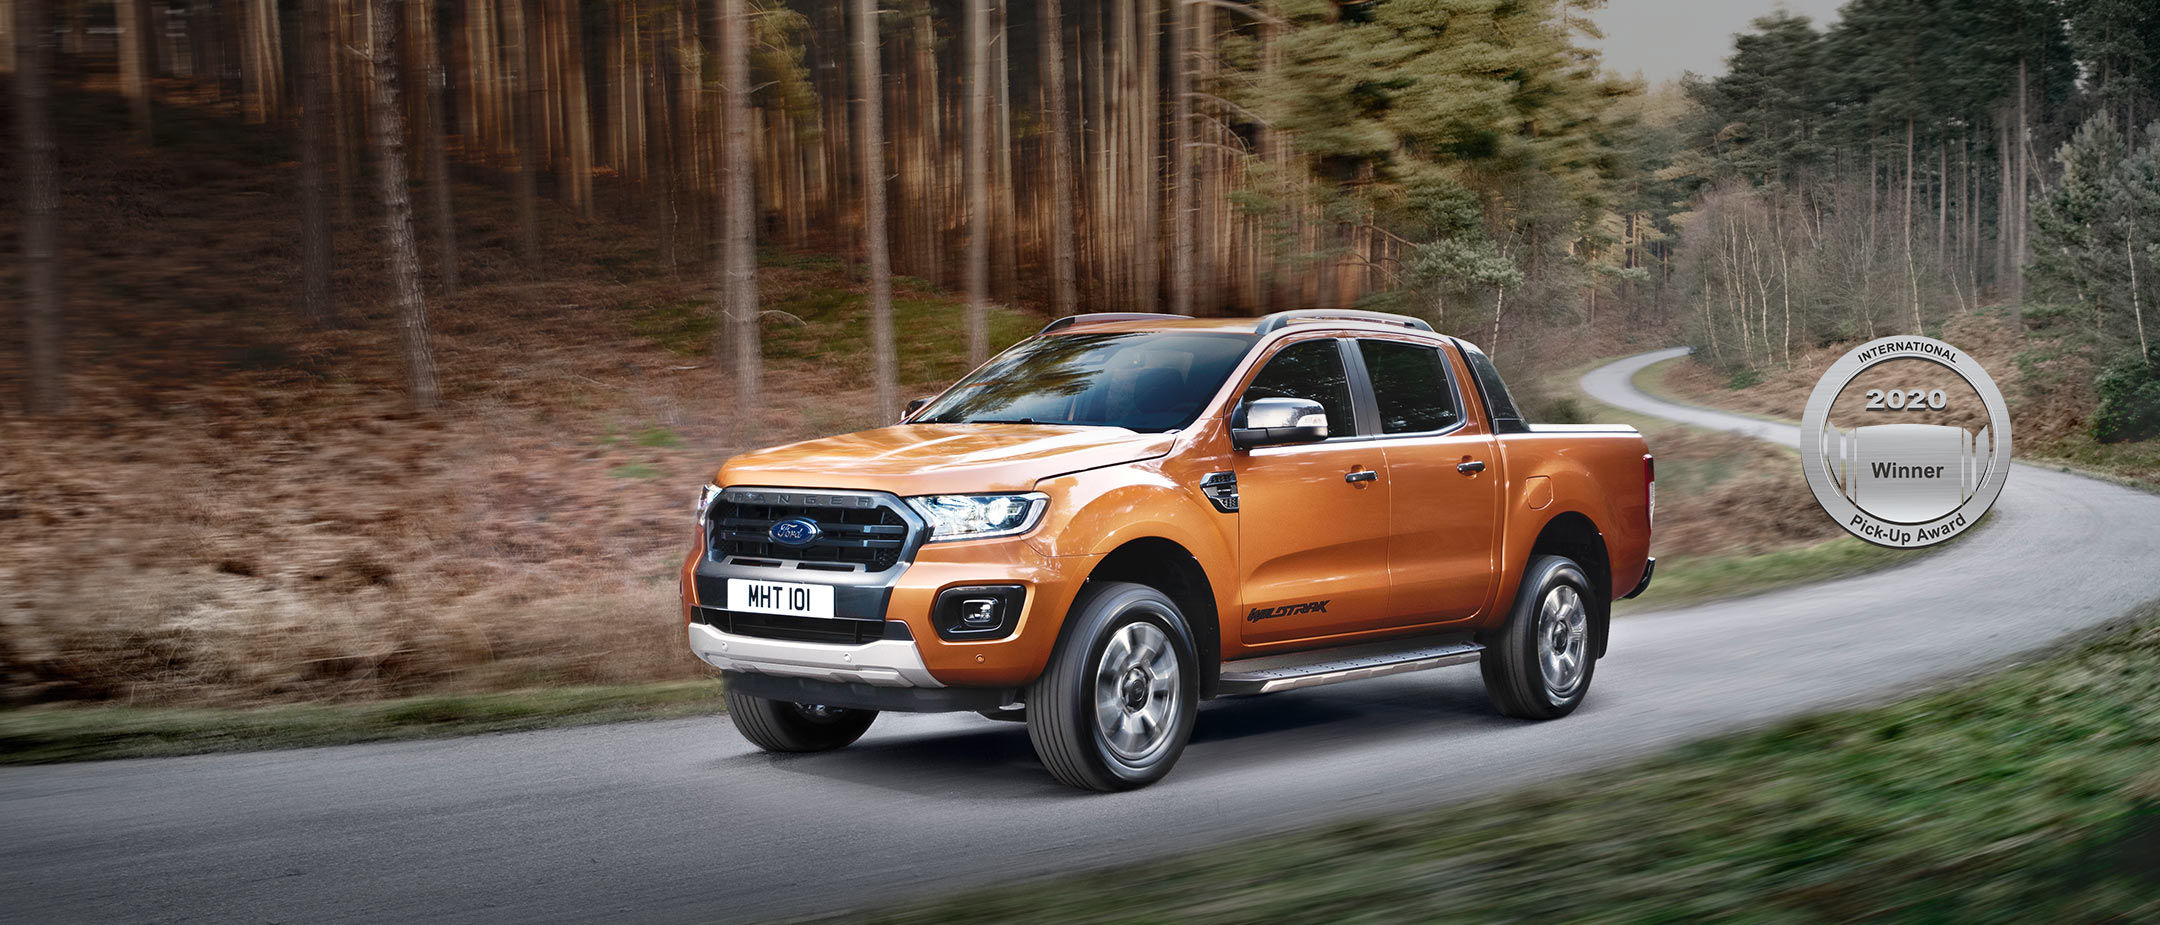 Orange Ford Ranger driving on a forest road